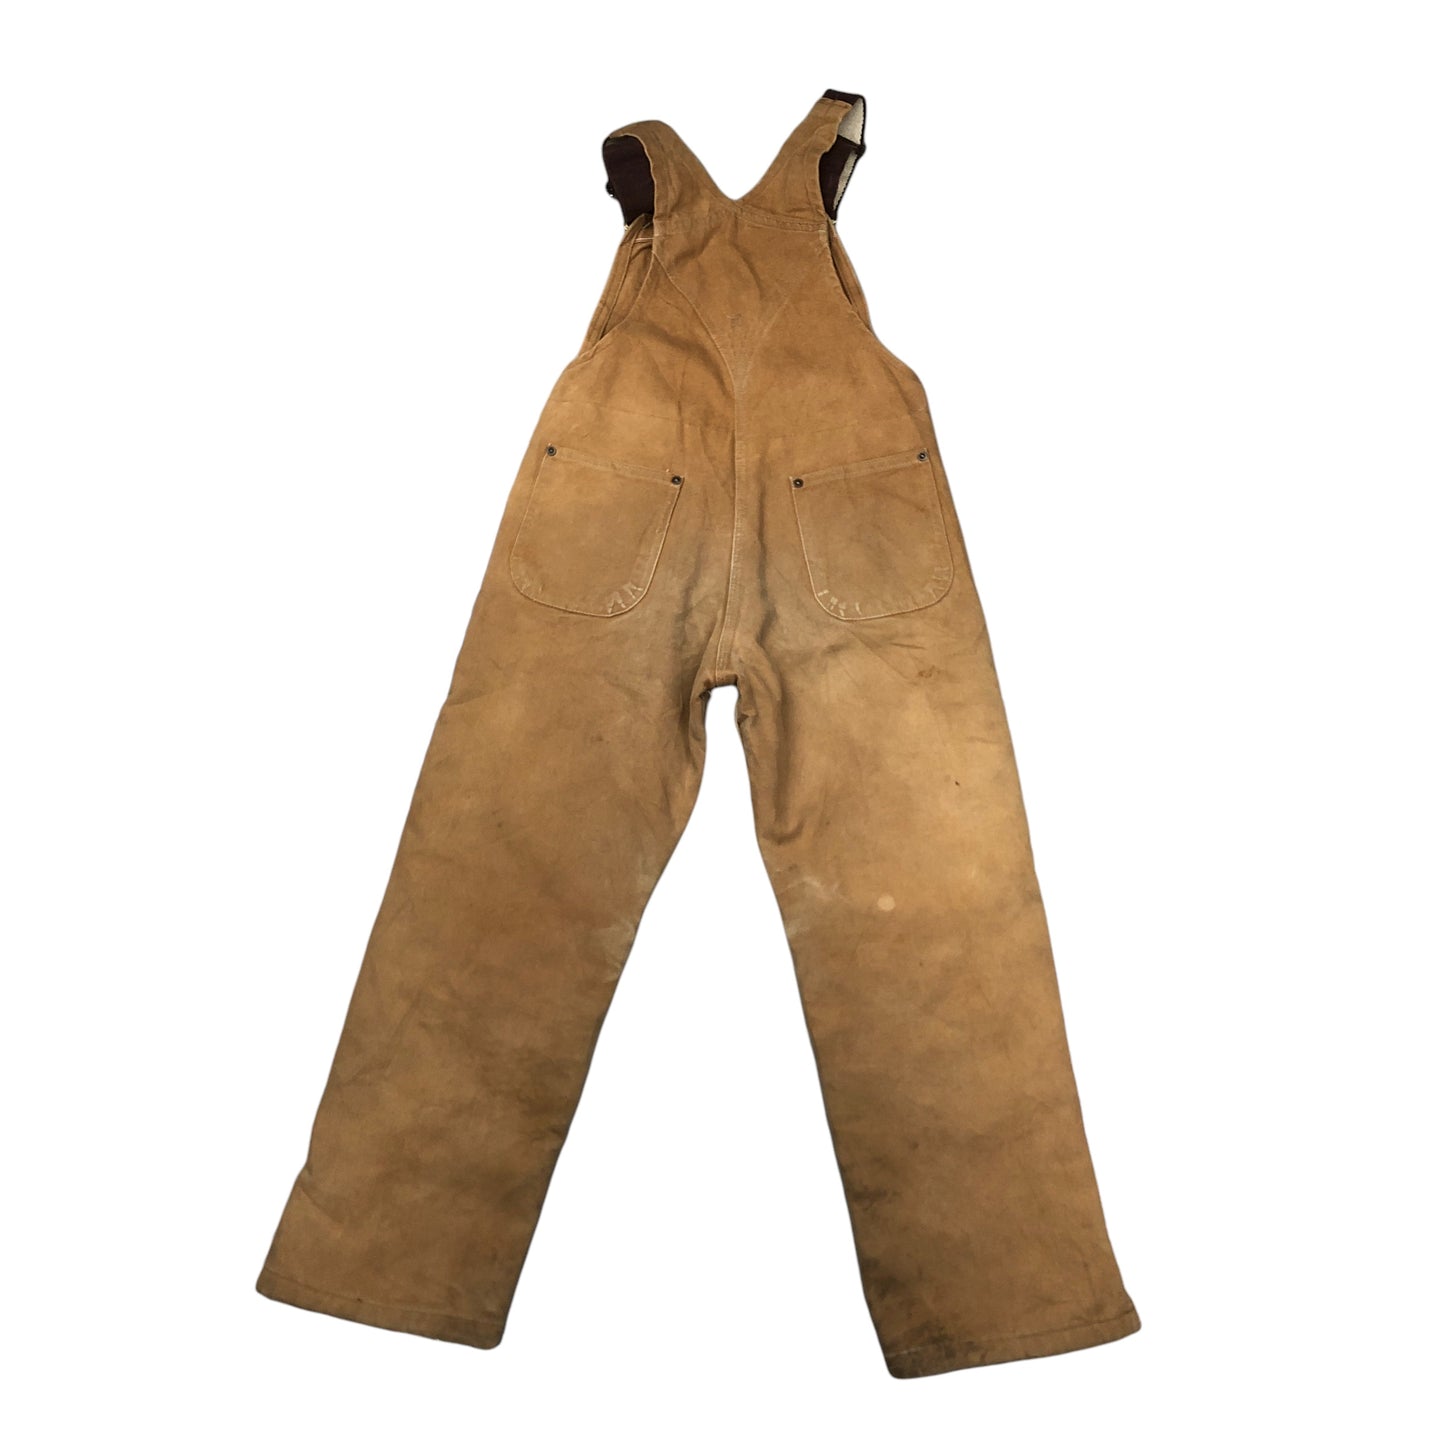 Vintage Carhartt Double Knee Dungarees (Age 10-12)